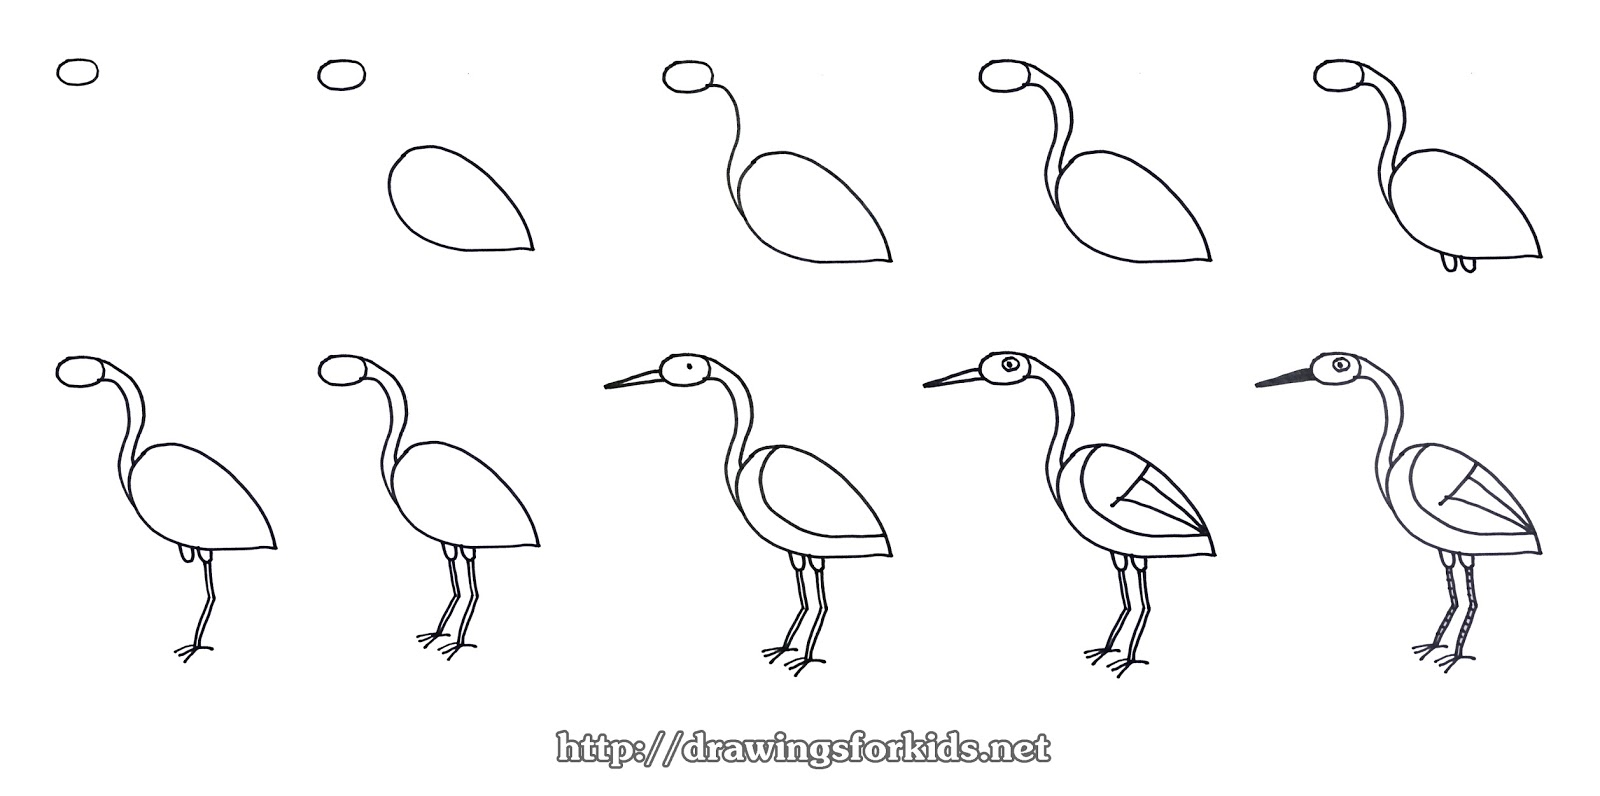 How to draw a Stork